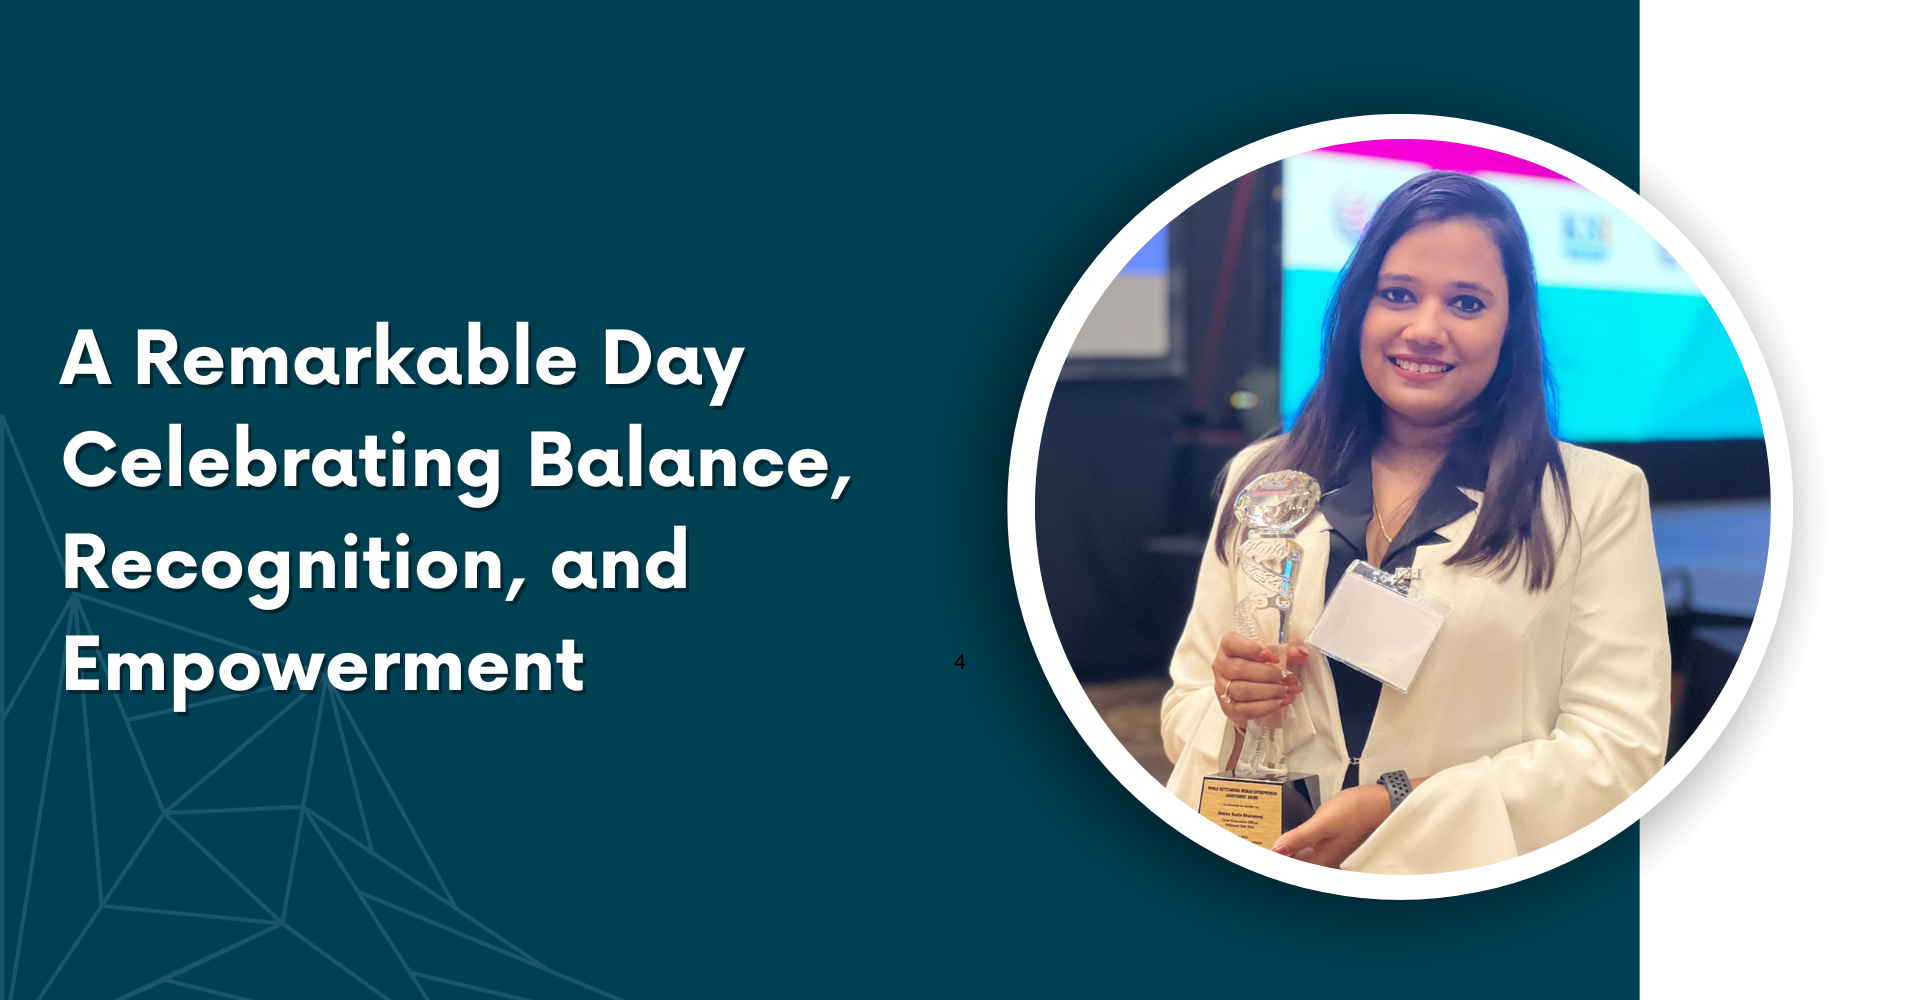 A Remarkable Day Celebrating Balance, Recognition, and Empowerment